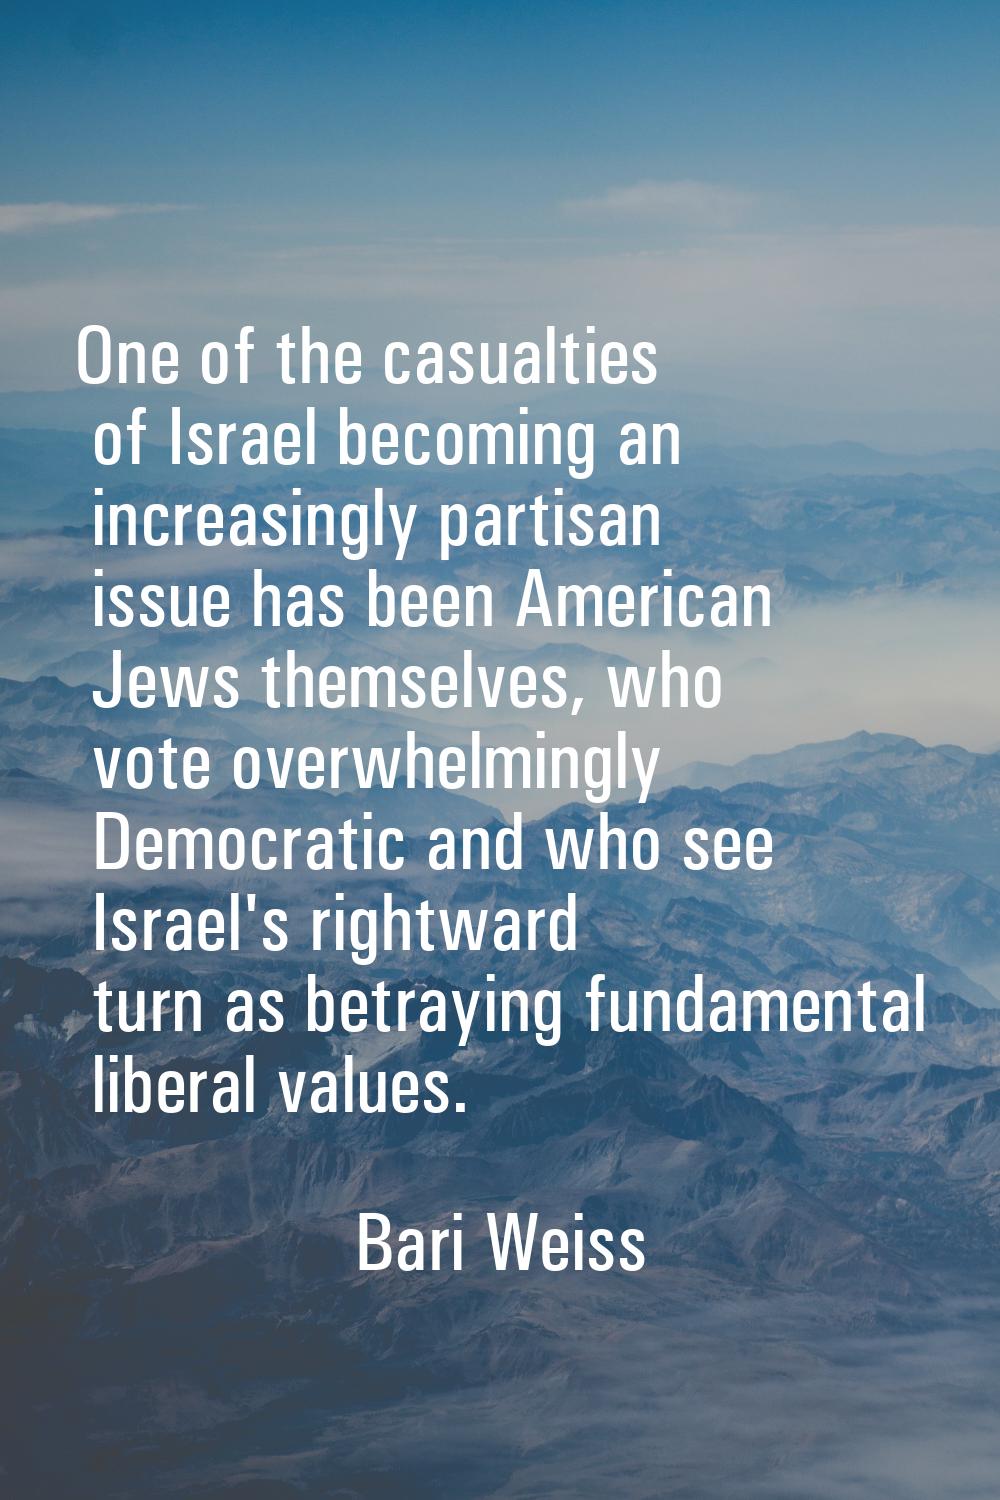 One of the casualties of Israel becoming an increasingly partisan issue has been American Jews them